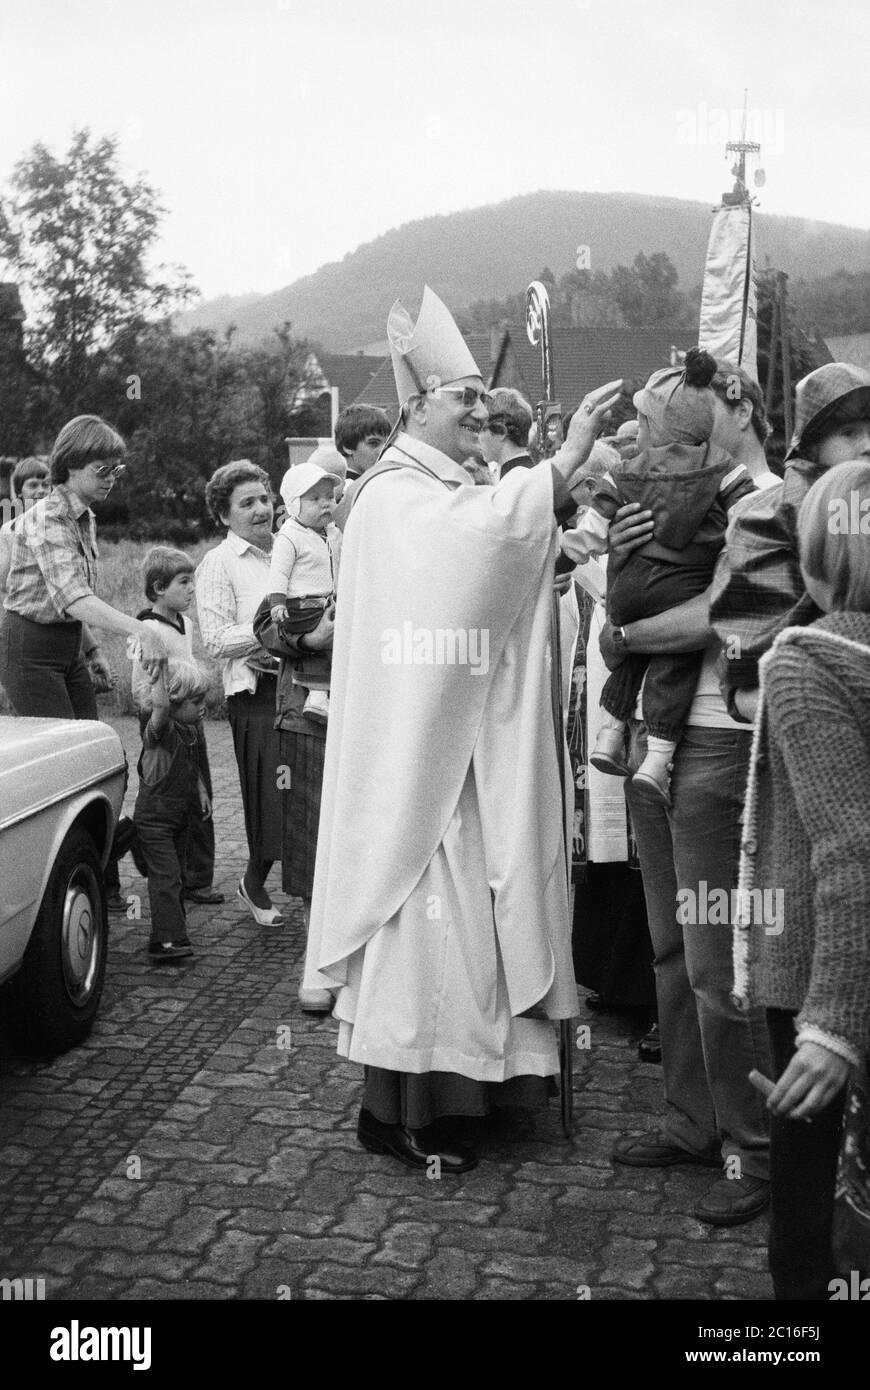 bishop on the occasion of confirmation, Wenholthausen, Eslohe, Sauerland, North Rhine-Westphalia, Germany Stock Photo